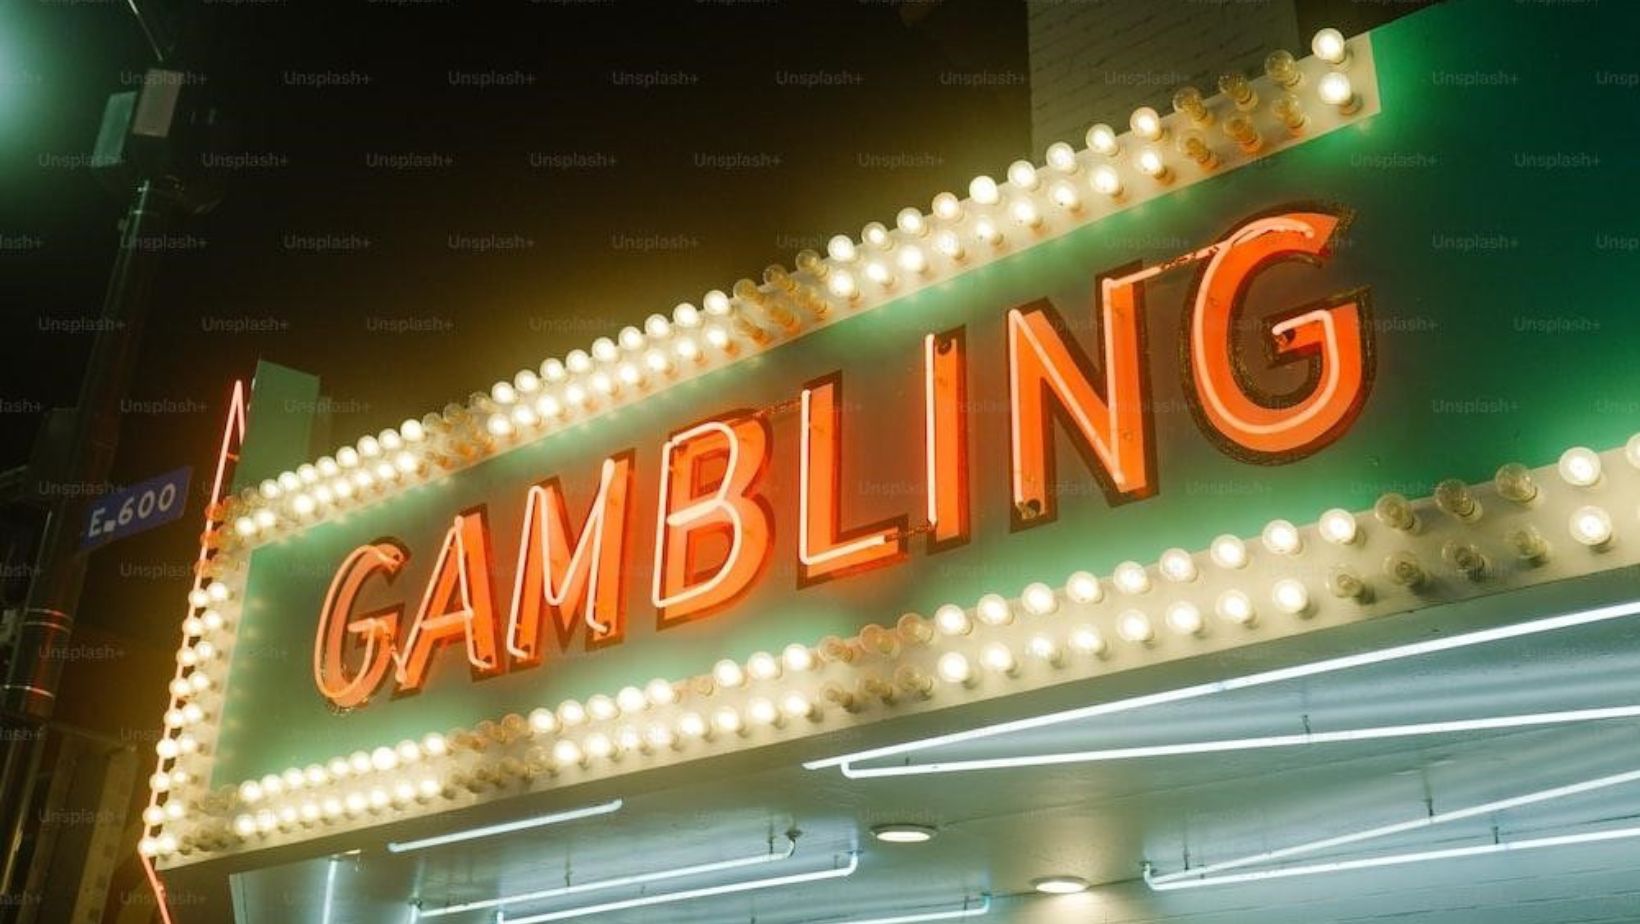 "Vibrant neon sign displaying the word 'Gambling' against a dark background